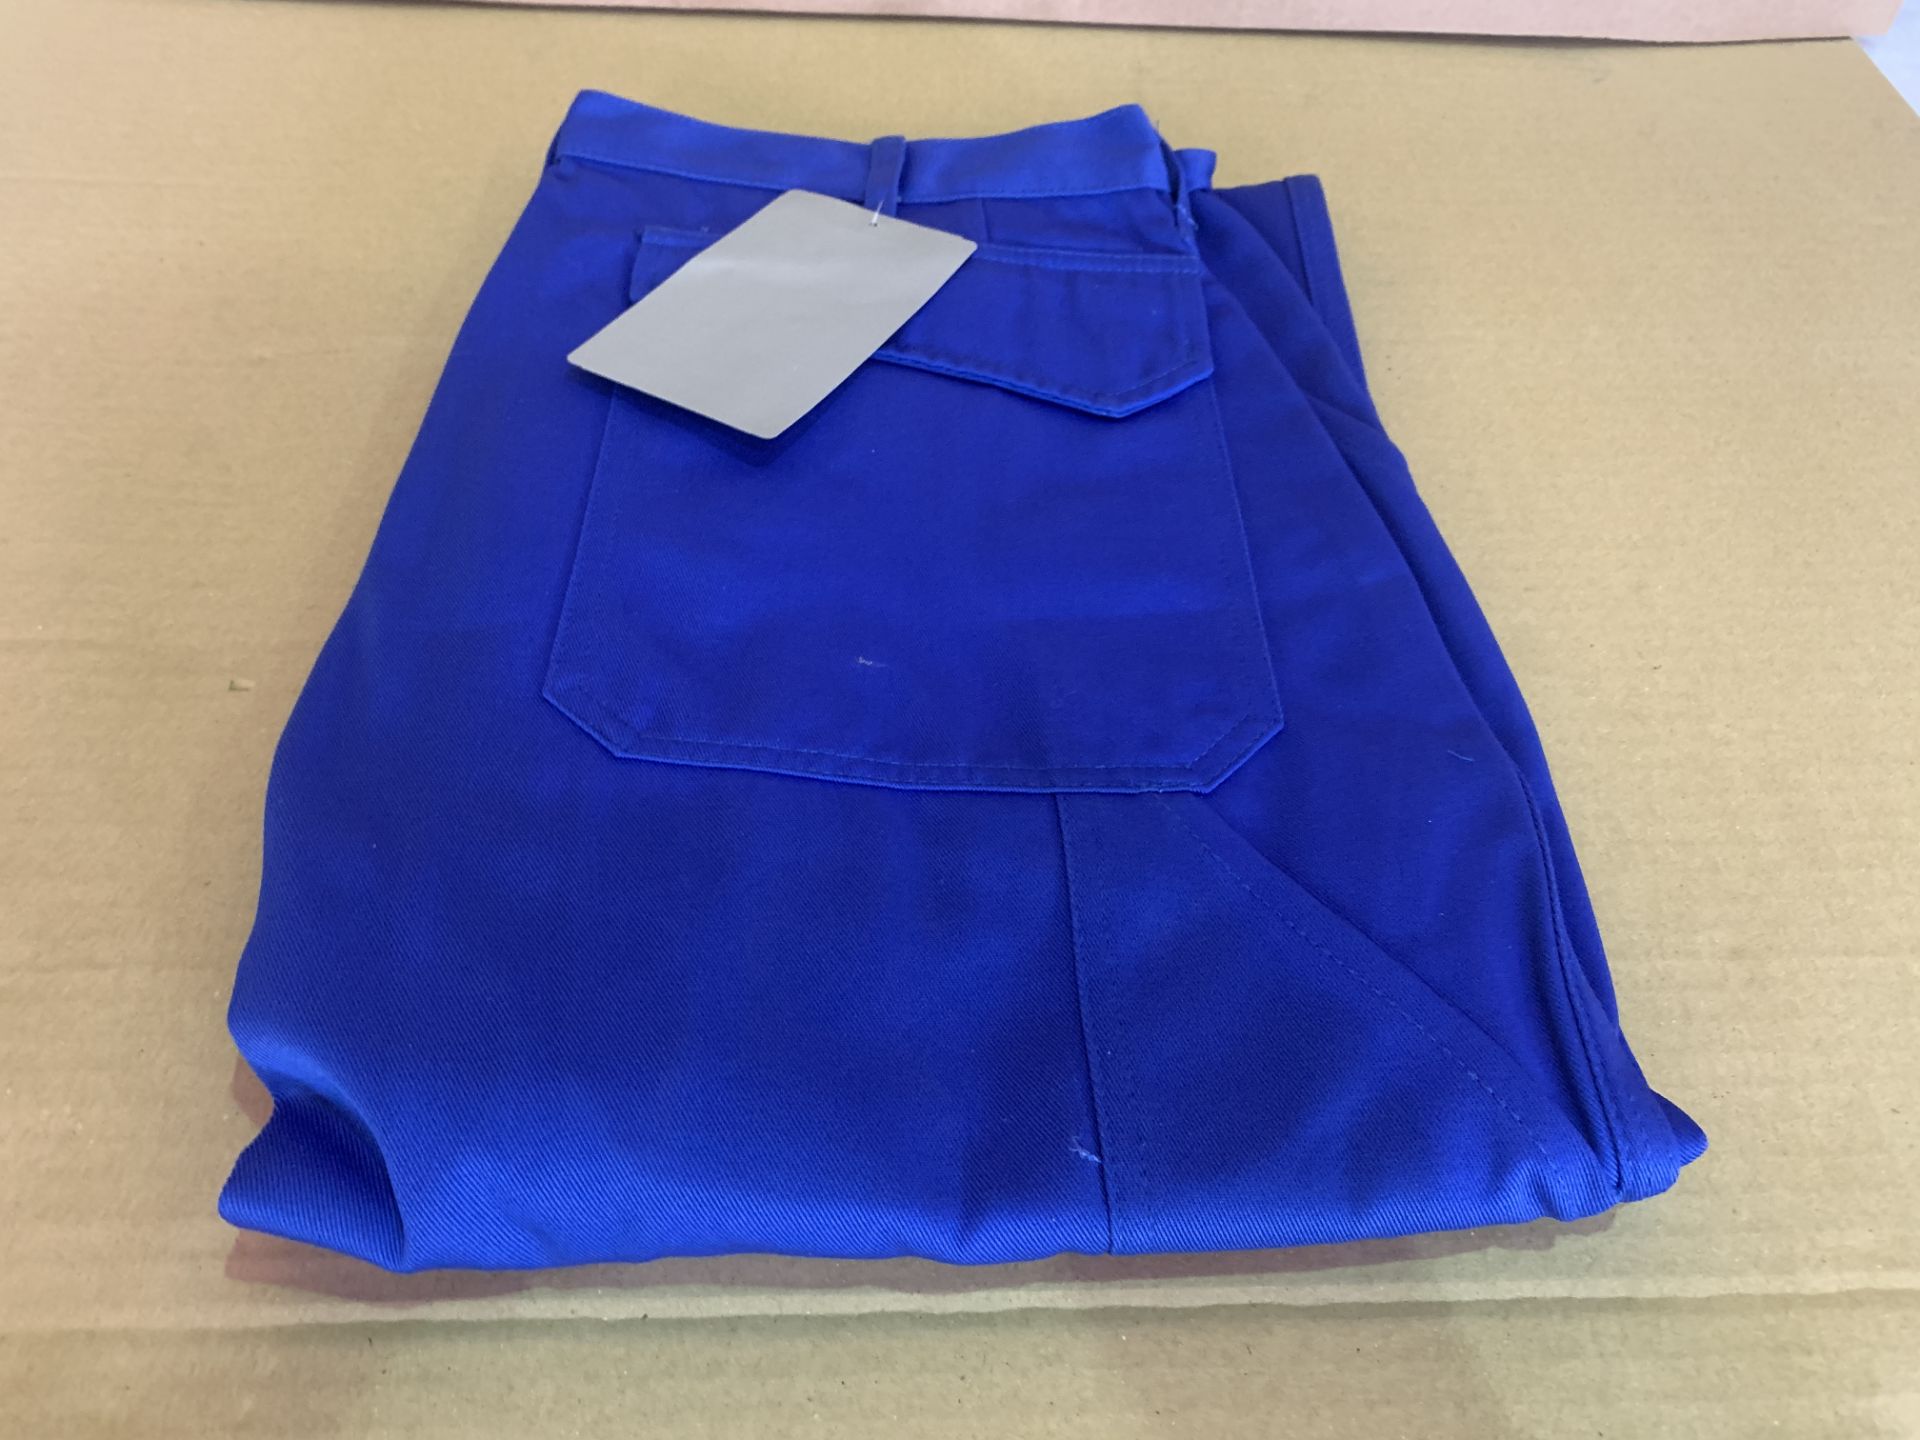 10 X BRAND NEW TRANEMO WORK TROUSERS BLUE IN VARIOUS SIZES R15